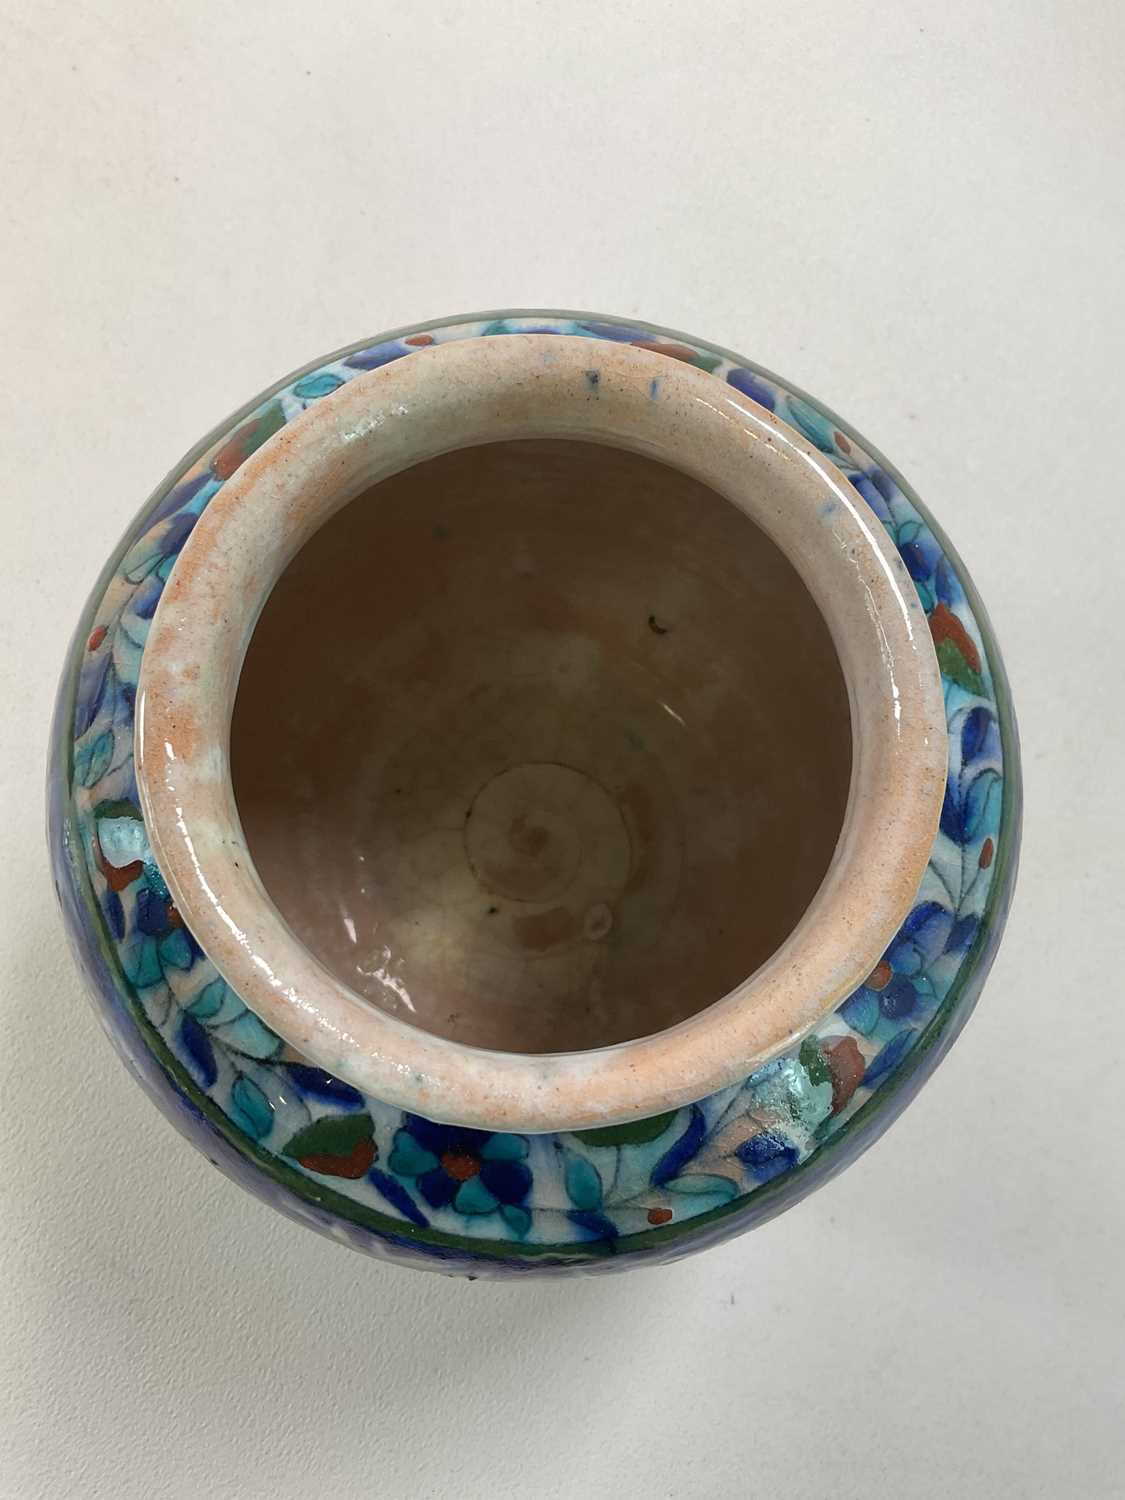 A Palestinian vase with floral and leaf decoration in shades of blue, turquoise, ochre and green, - Image 3 of 4